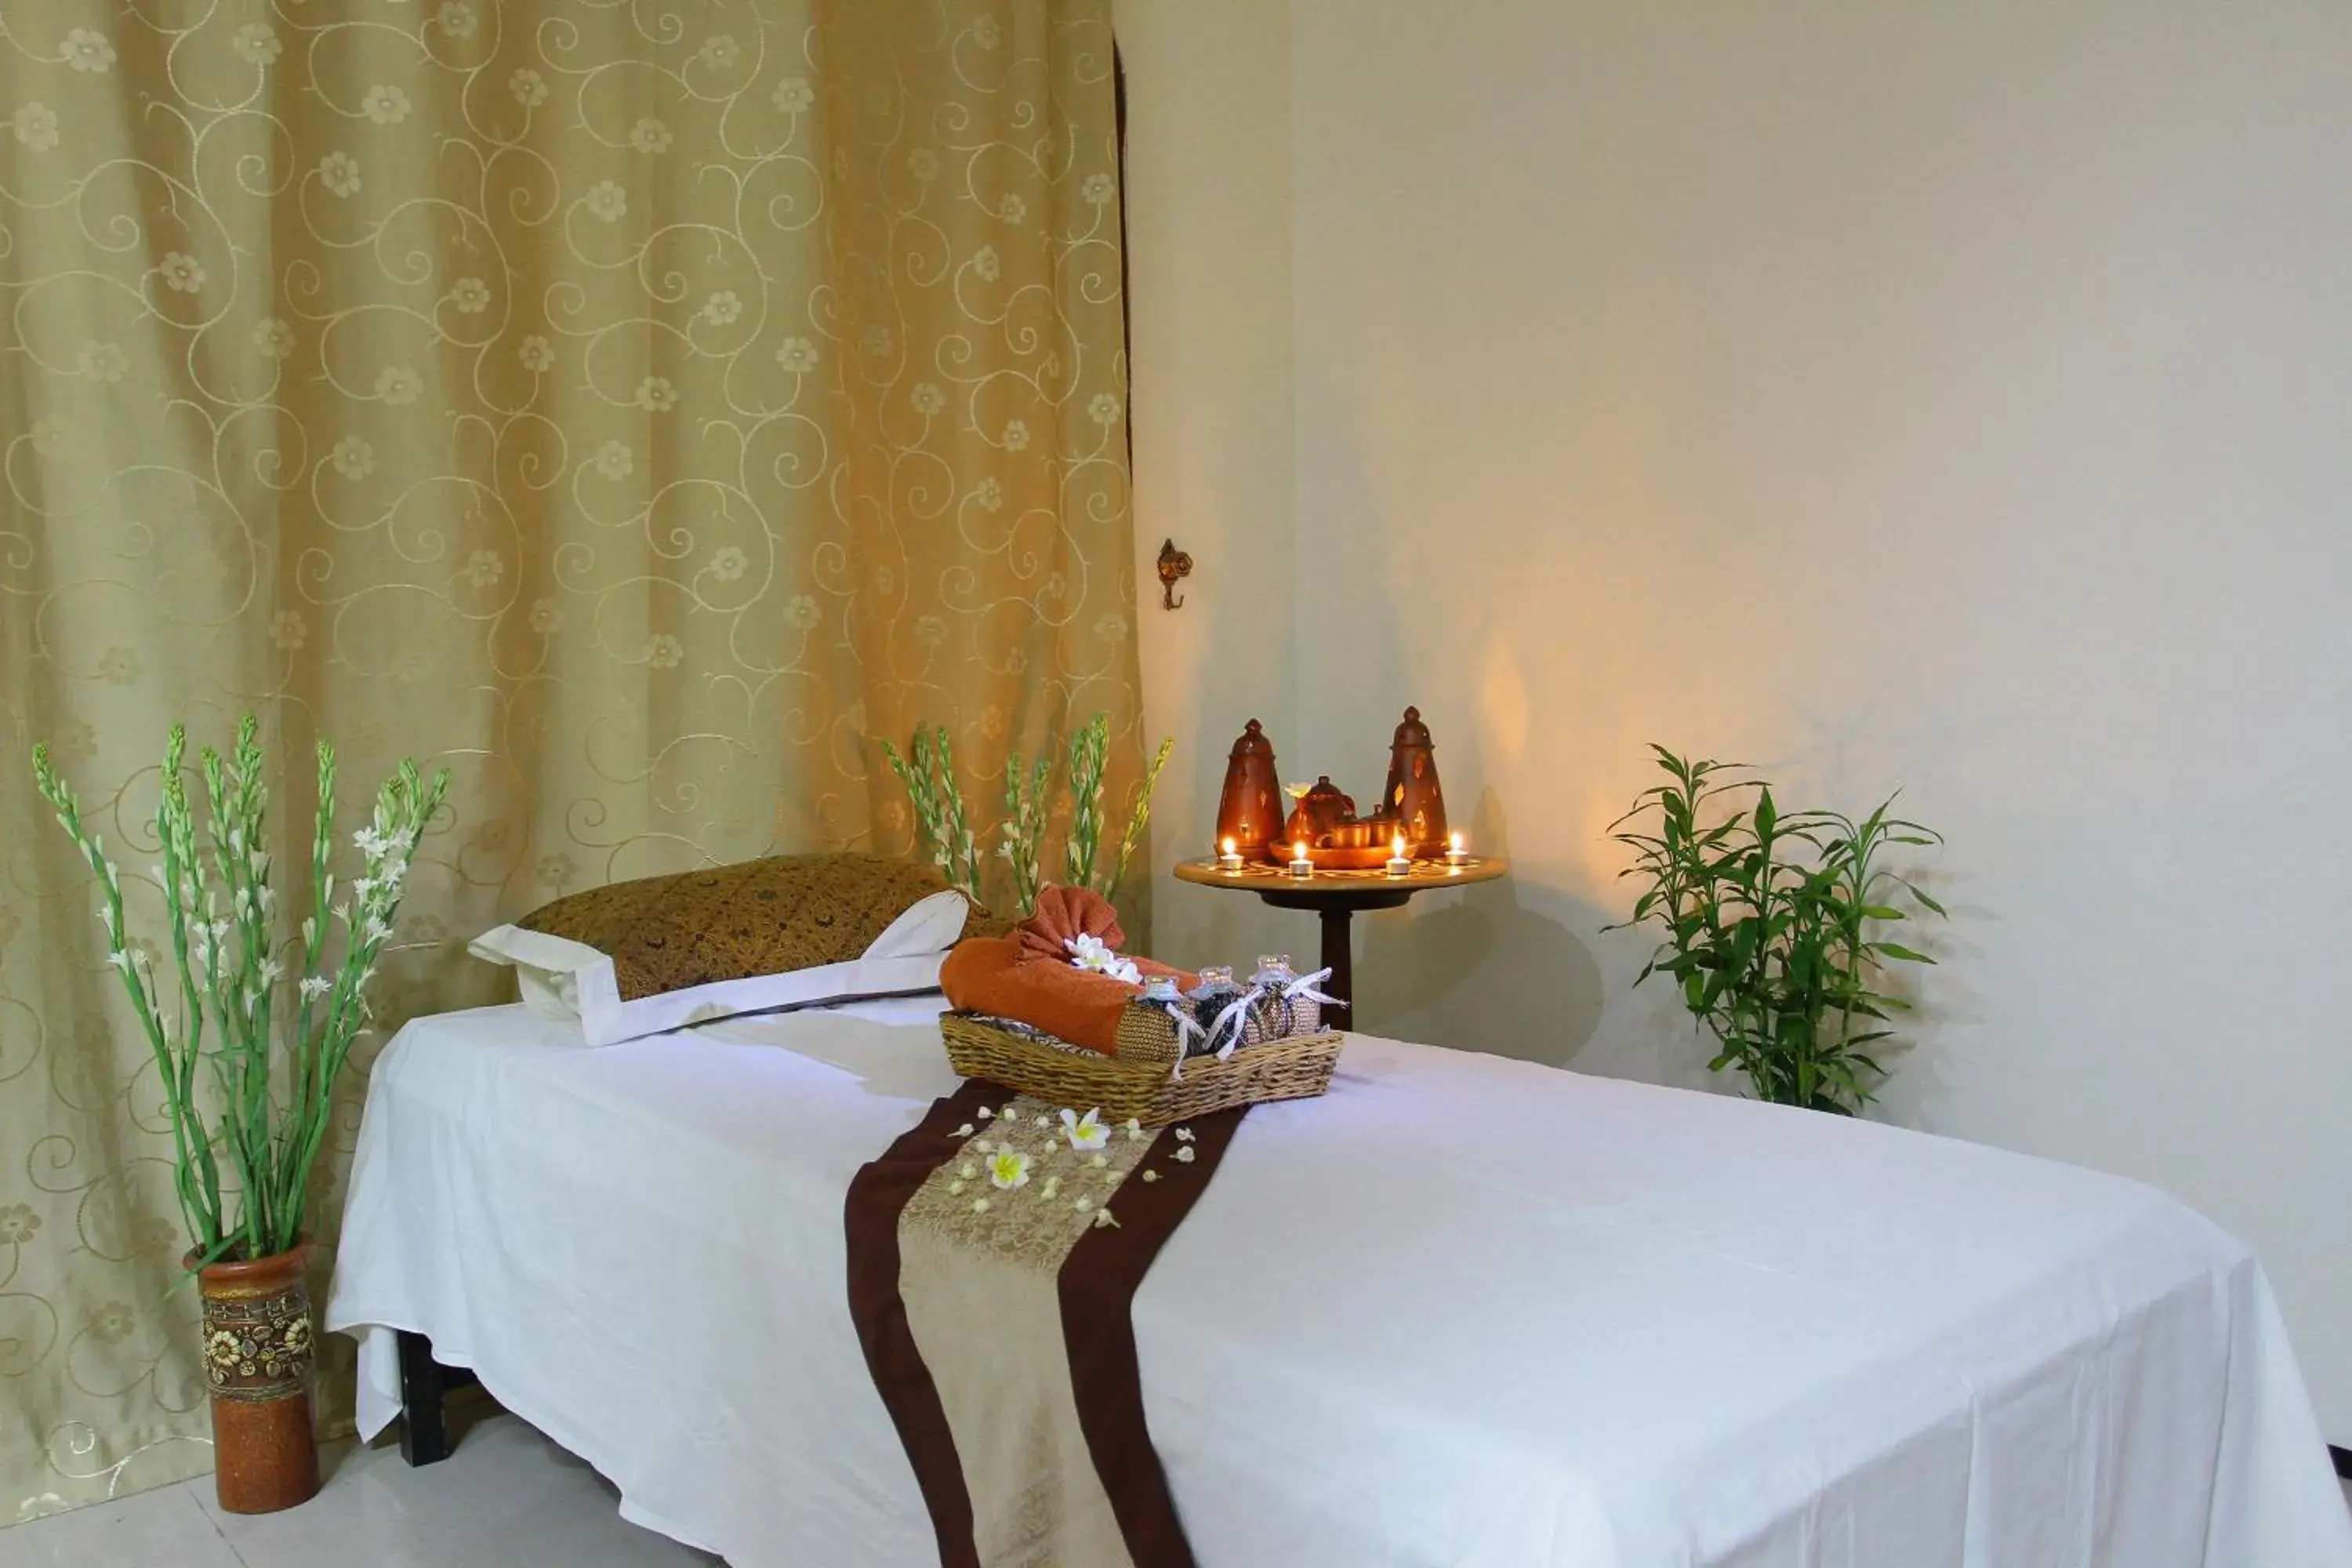 Spa and wellness centre/facilities, Room Photo in The Grand Palace Hotel Malang